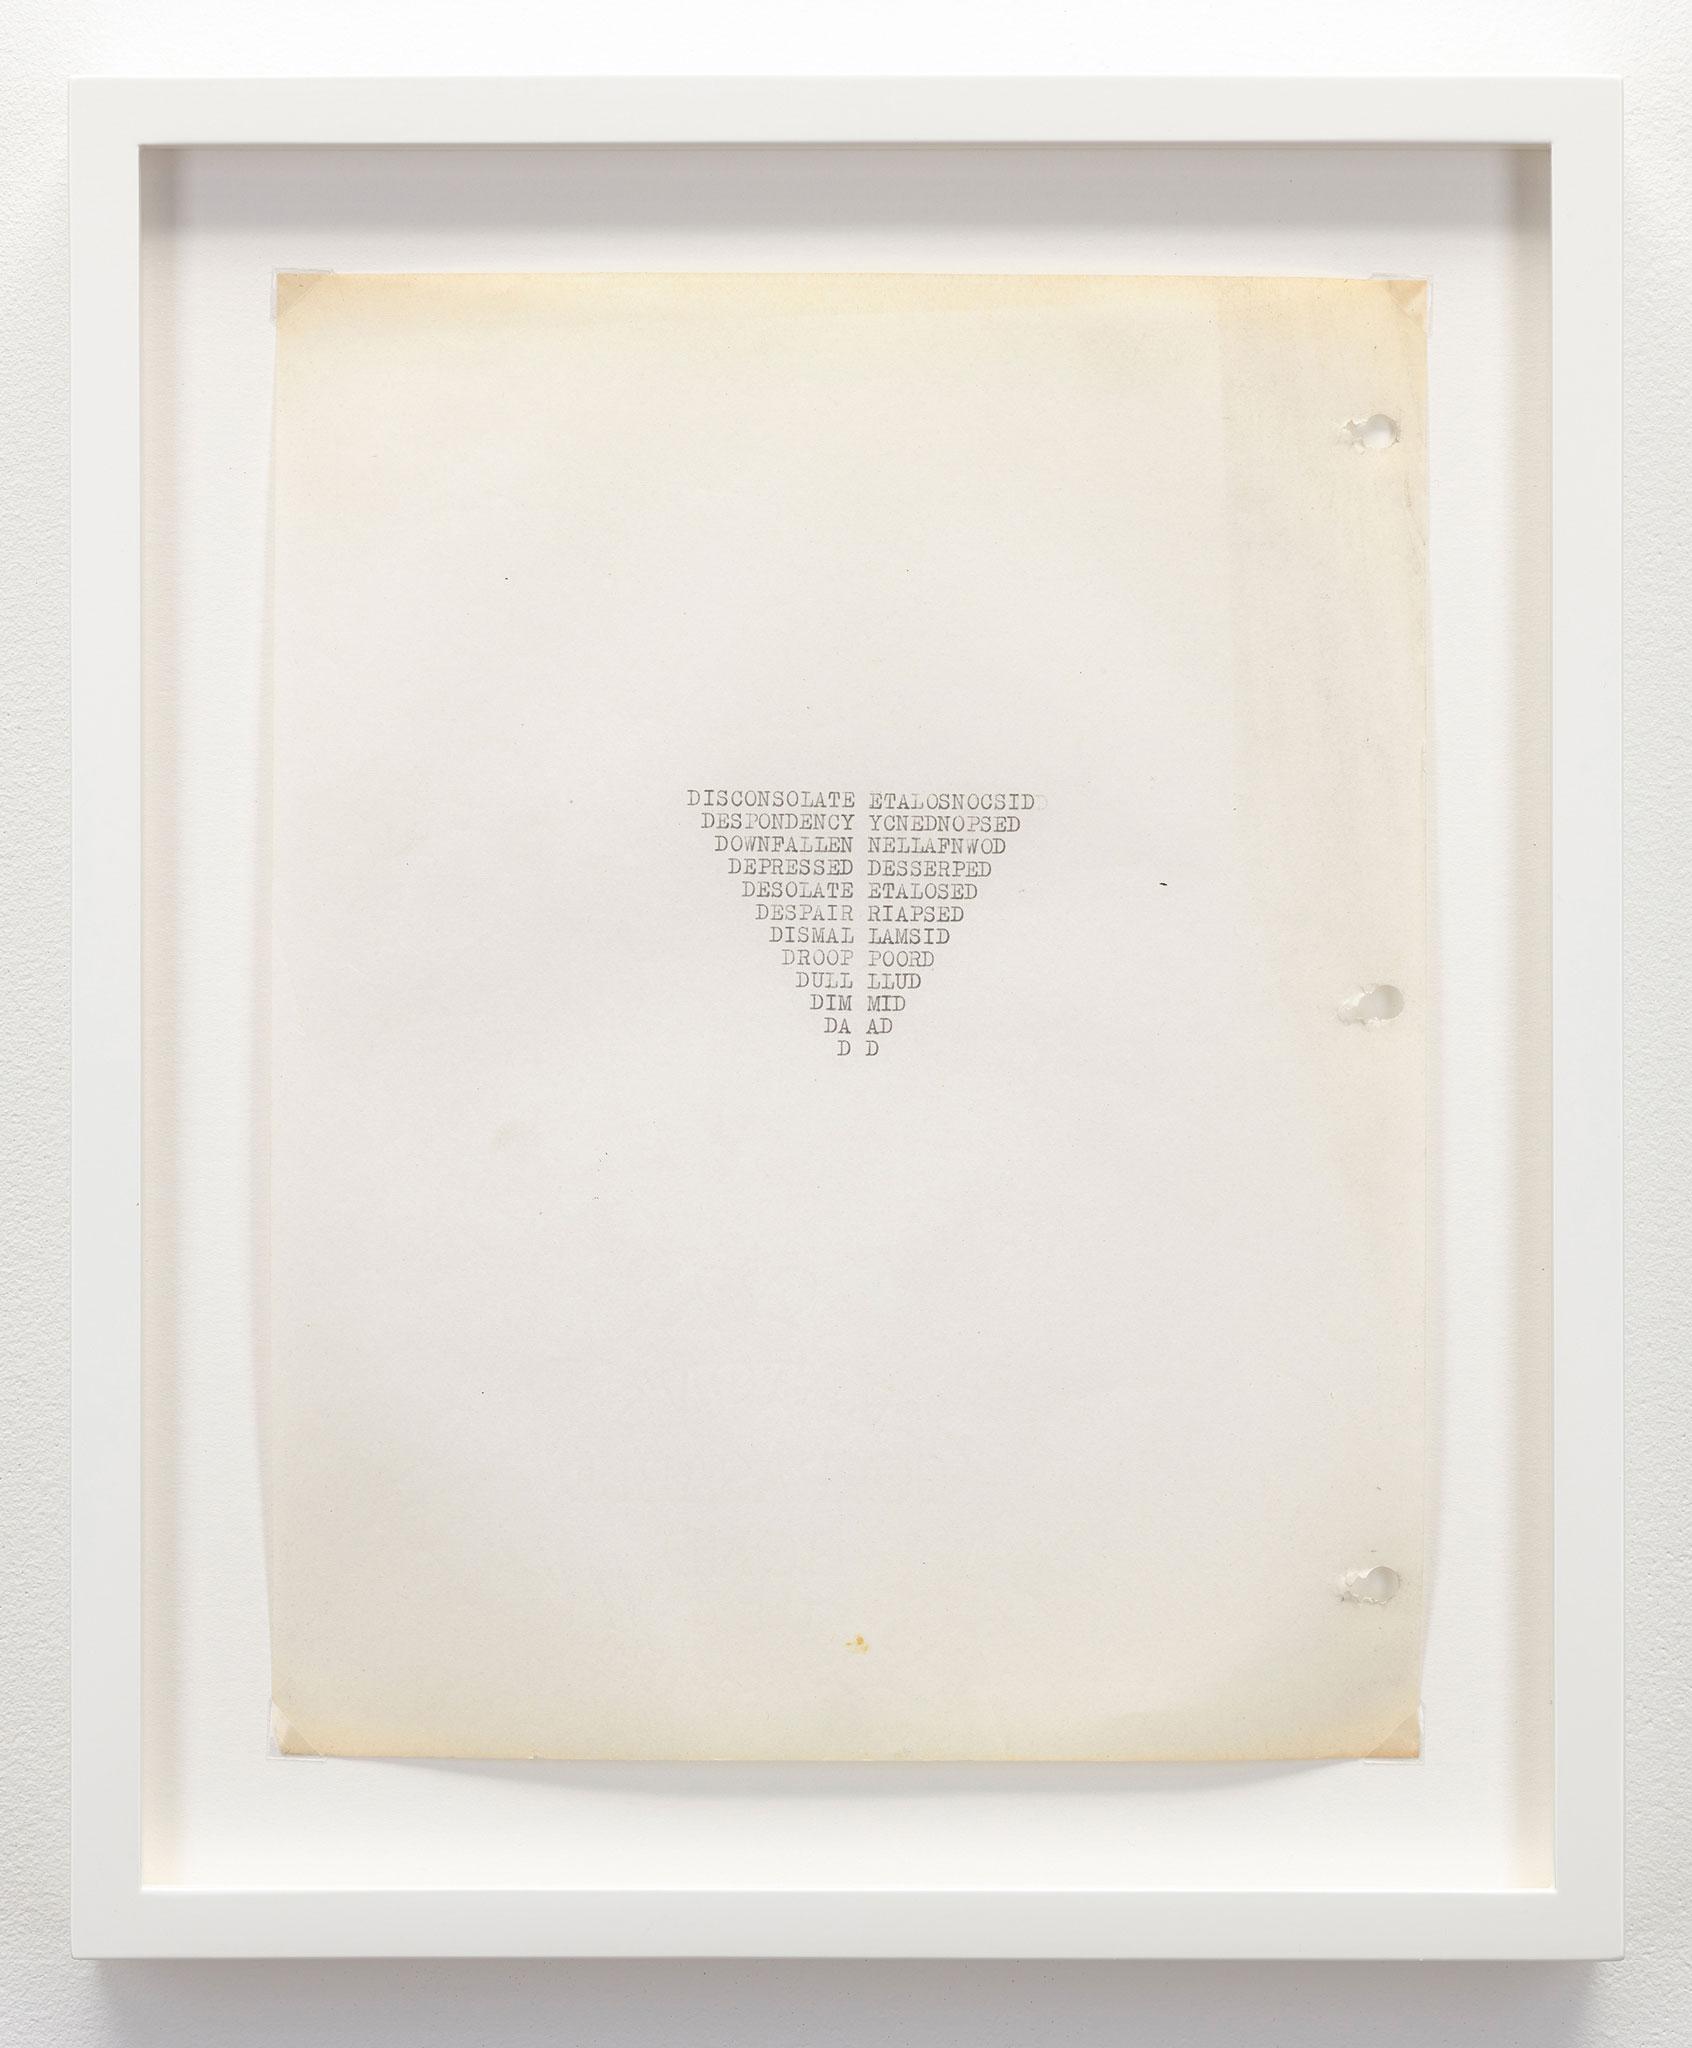 a white frame surrounding a yellowing piece of letter size paper with words typewritten in the shape of an inverted triangle in the center of the paper